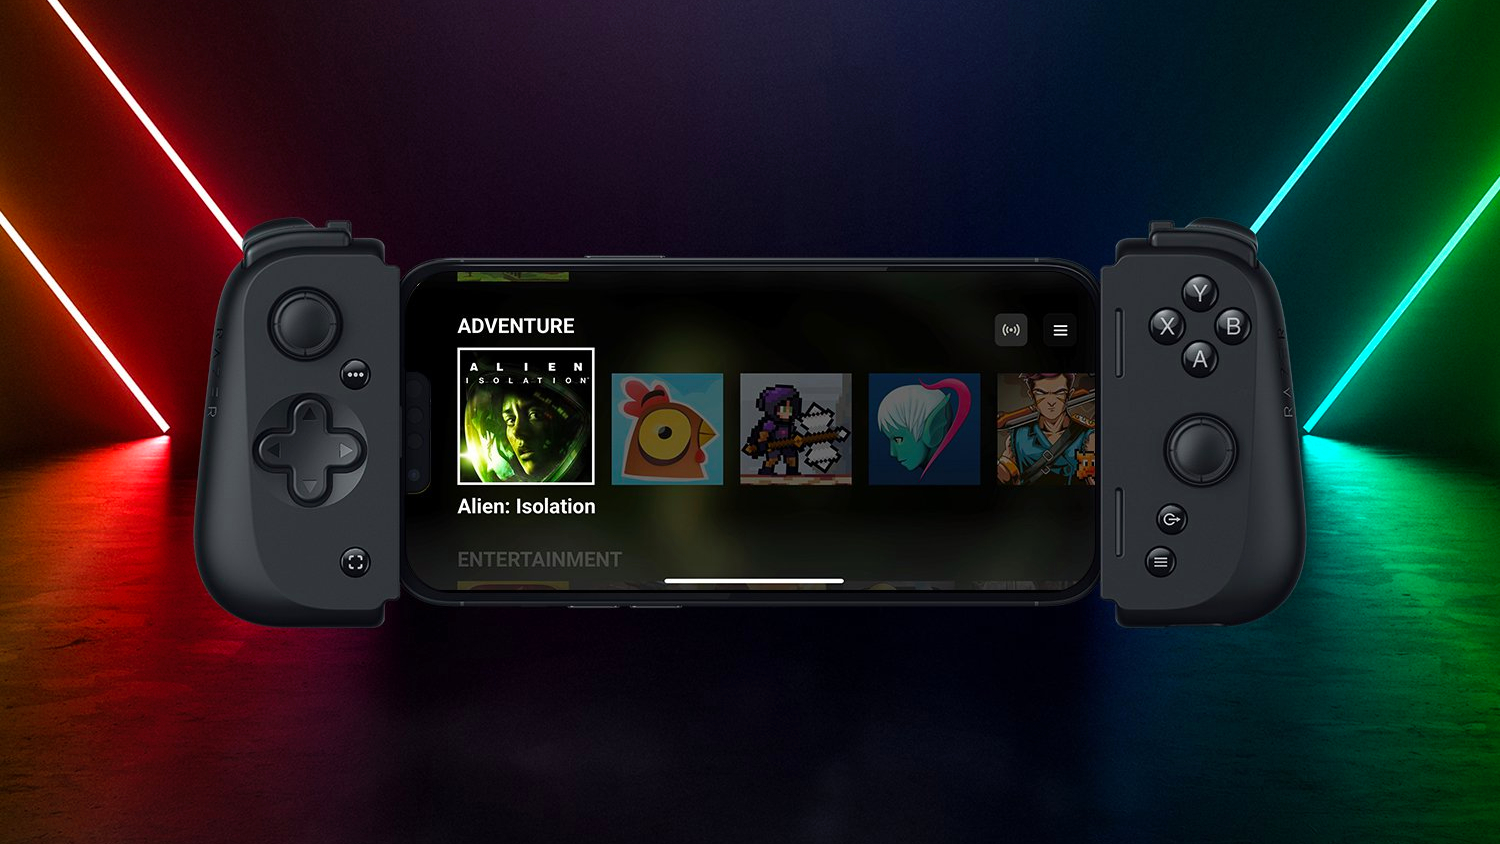 Razer Launches Kishi V2 Game Controller for iPhone With Several Improvements